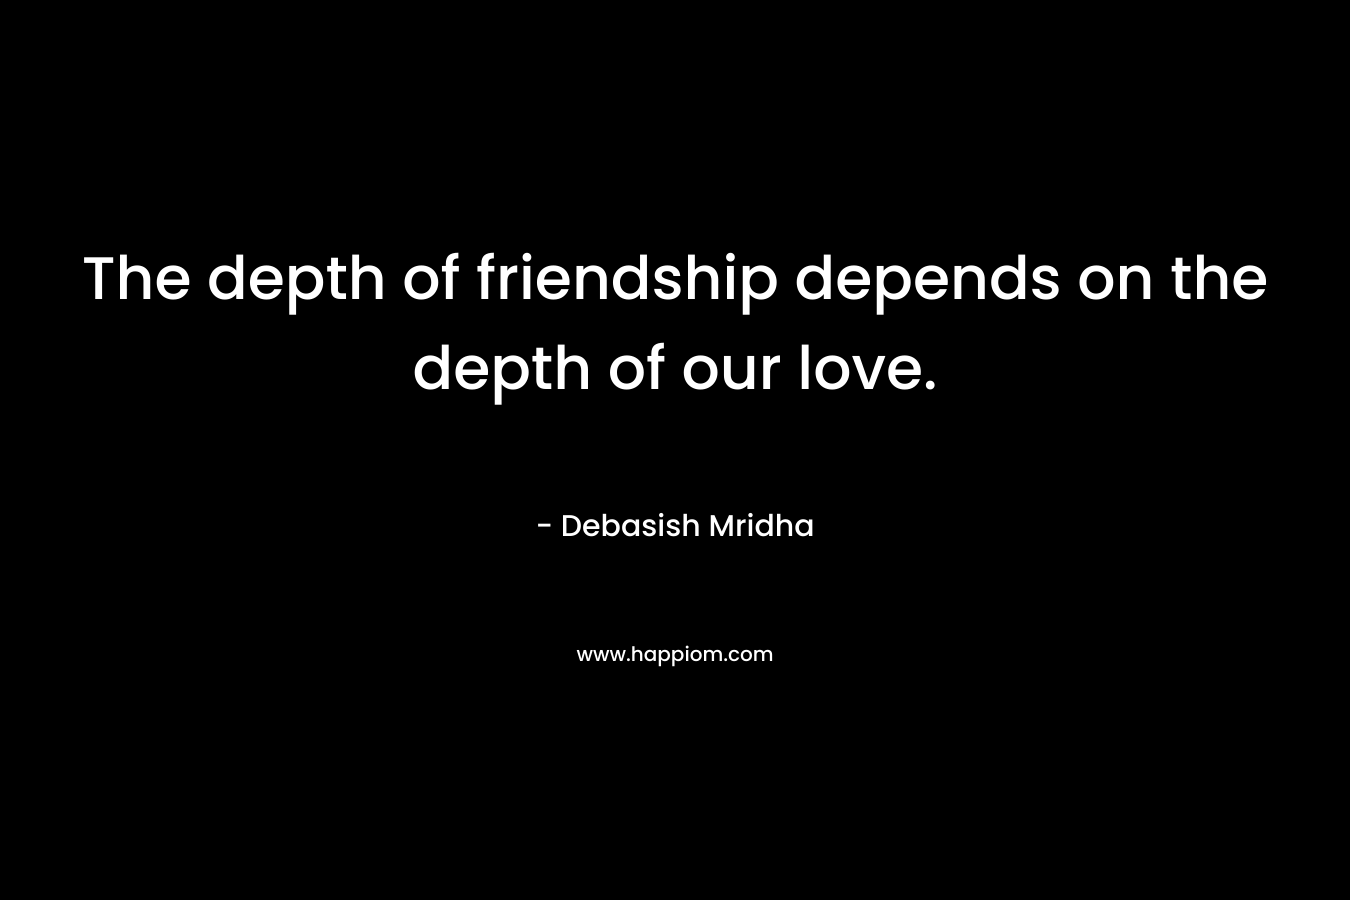 The depth of friendship depends on the depth of our love.